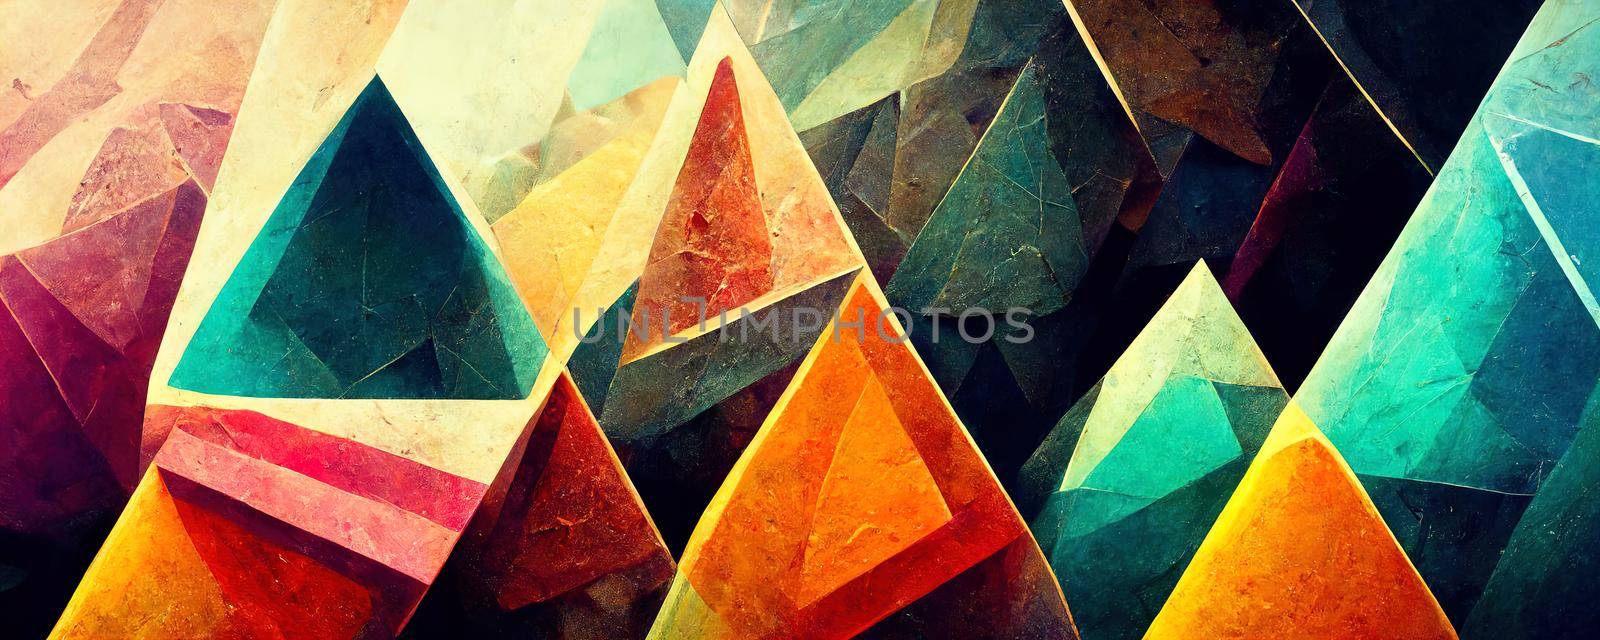 texture in the form of multi-colored relief triangles by TRMK